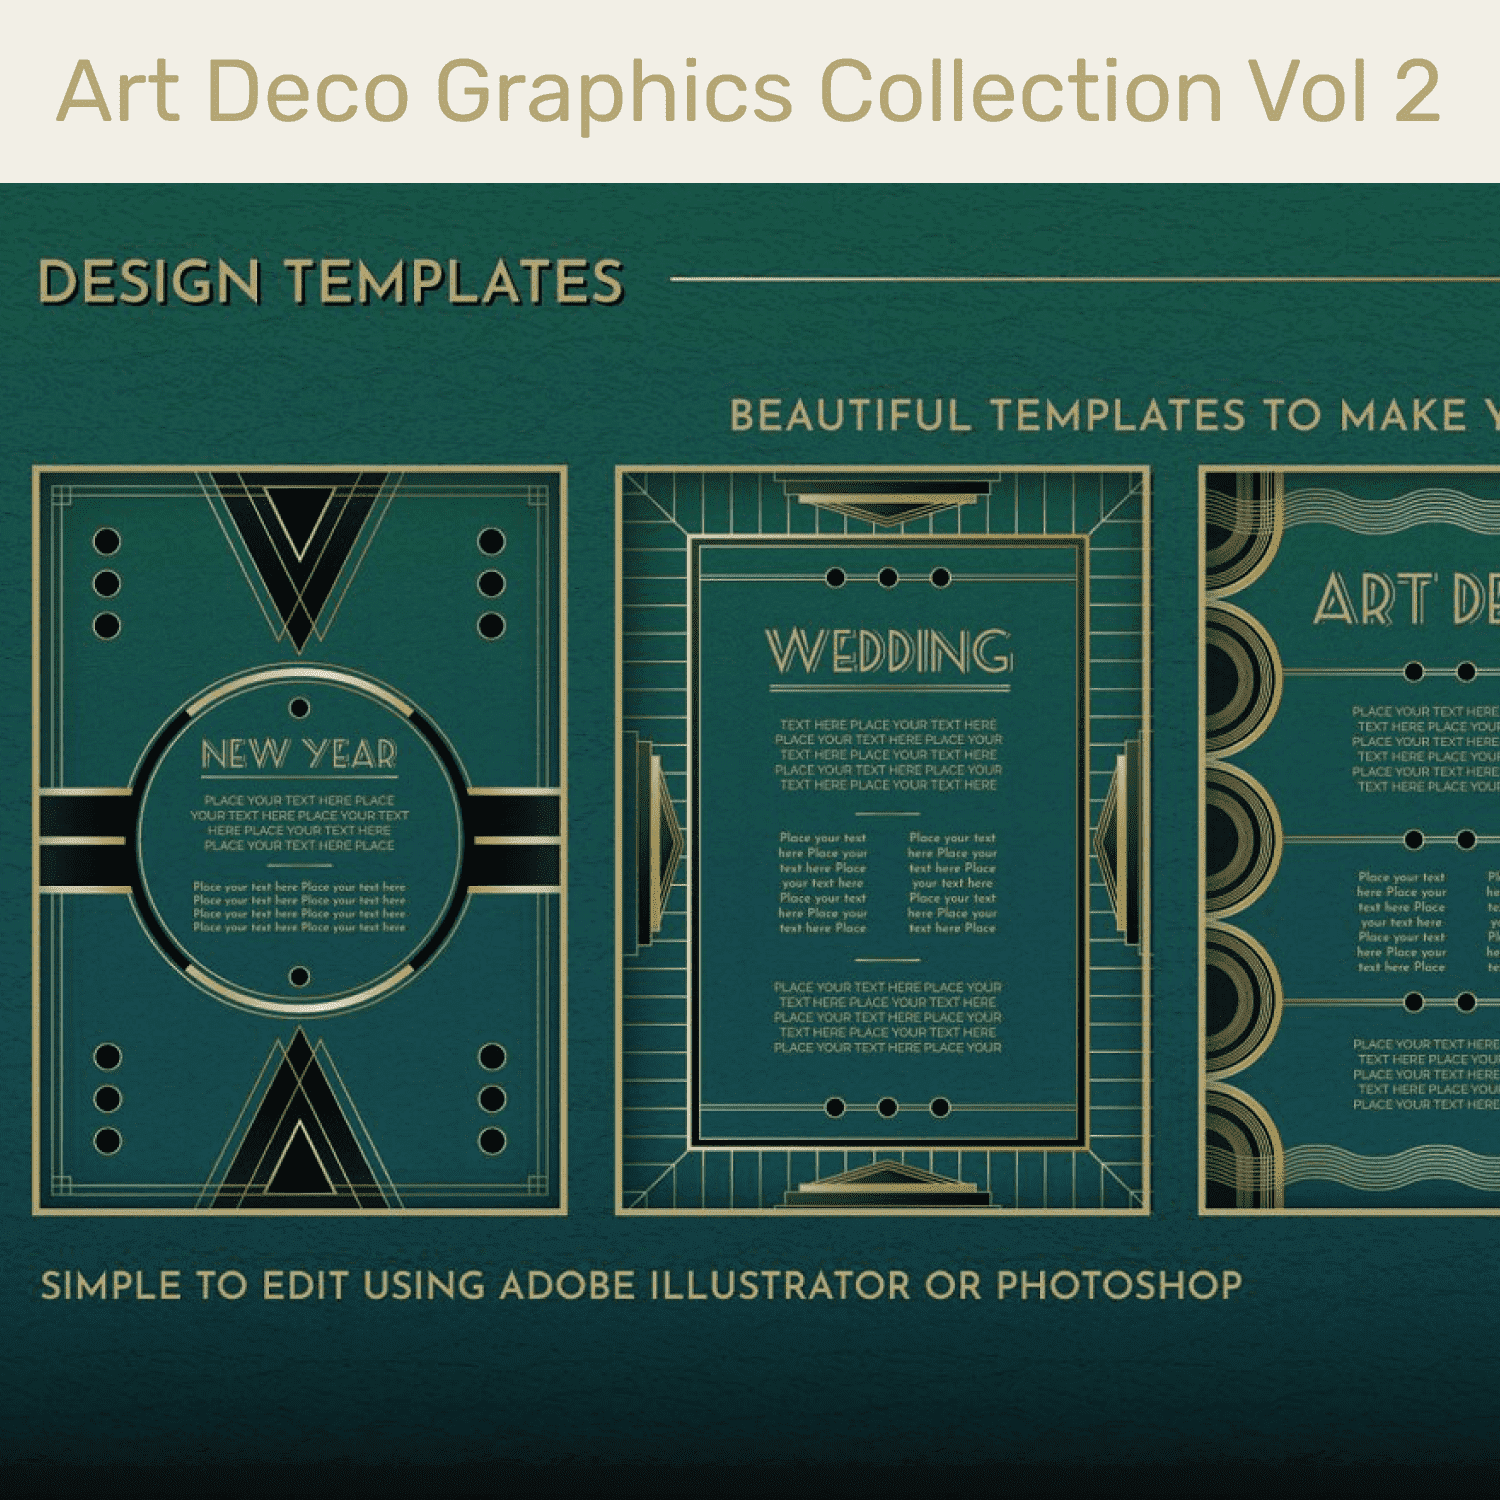 art deco graphics collection vol 2 cover